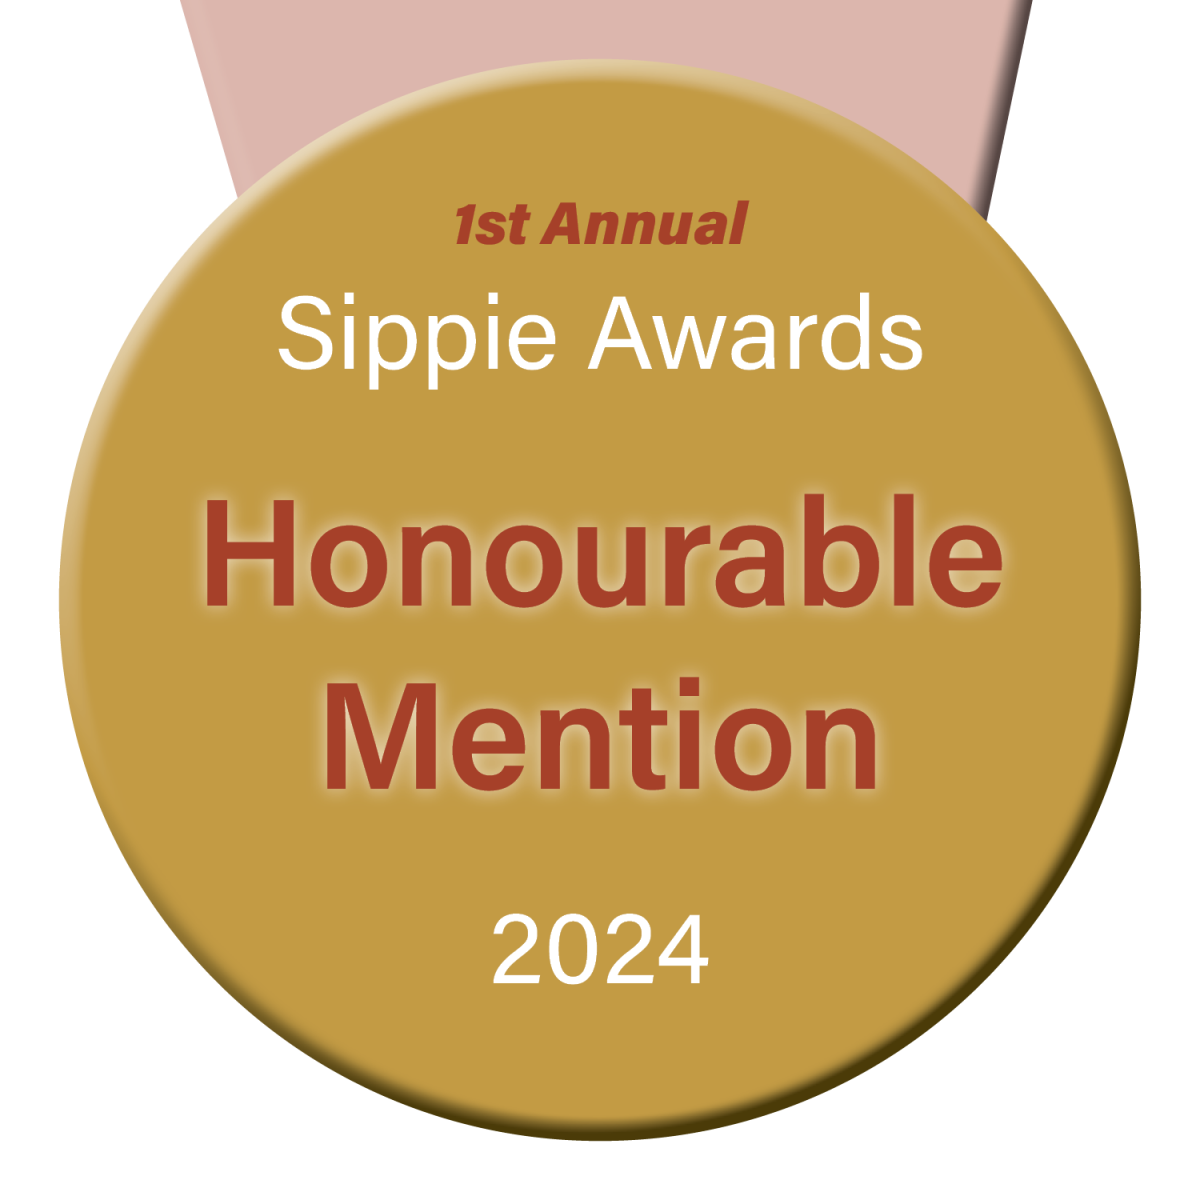 1st Annual Sippie Awards